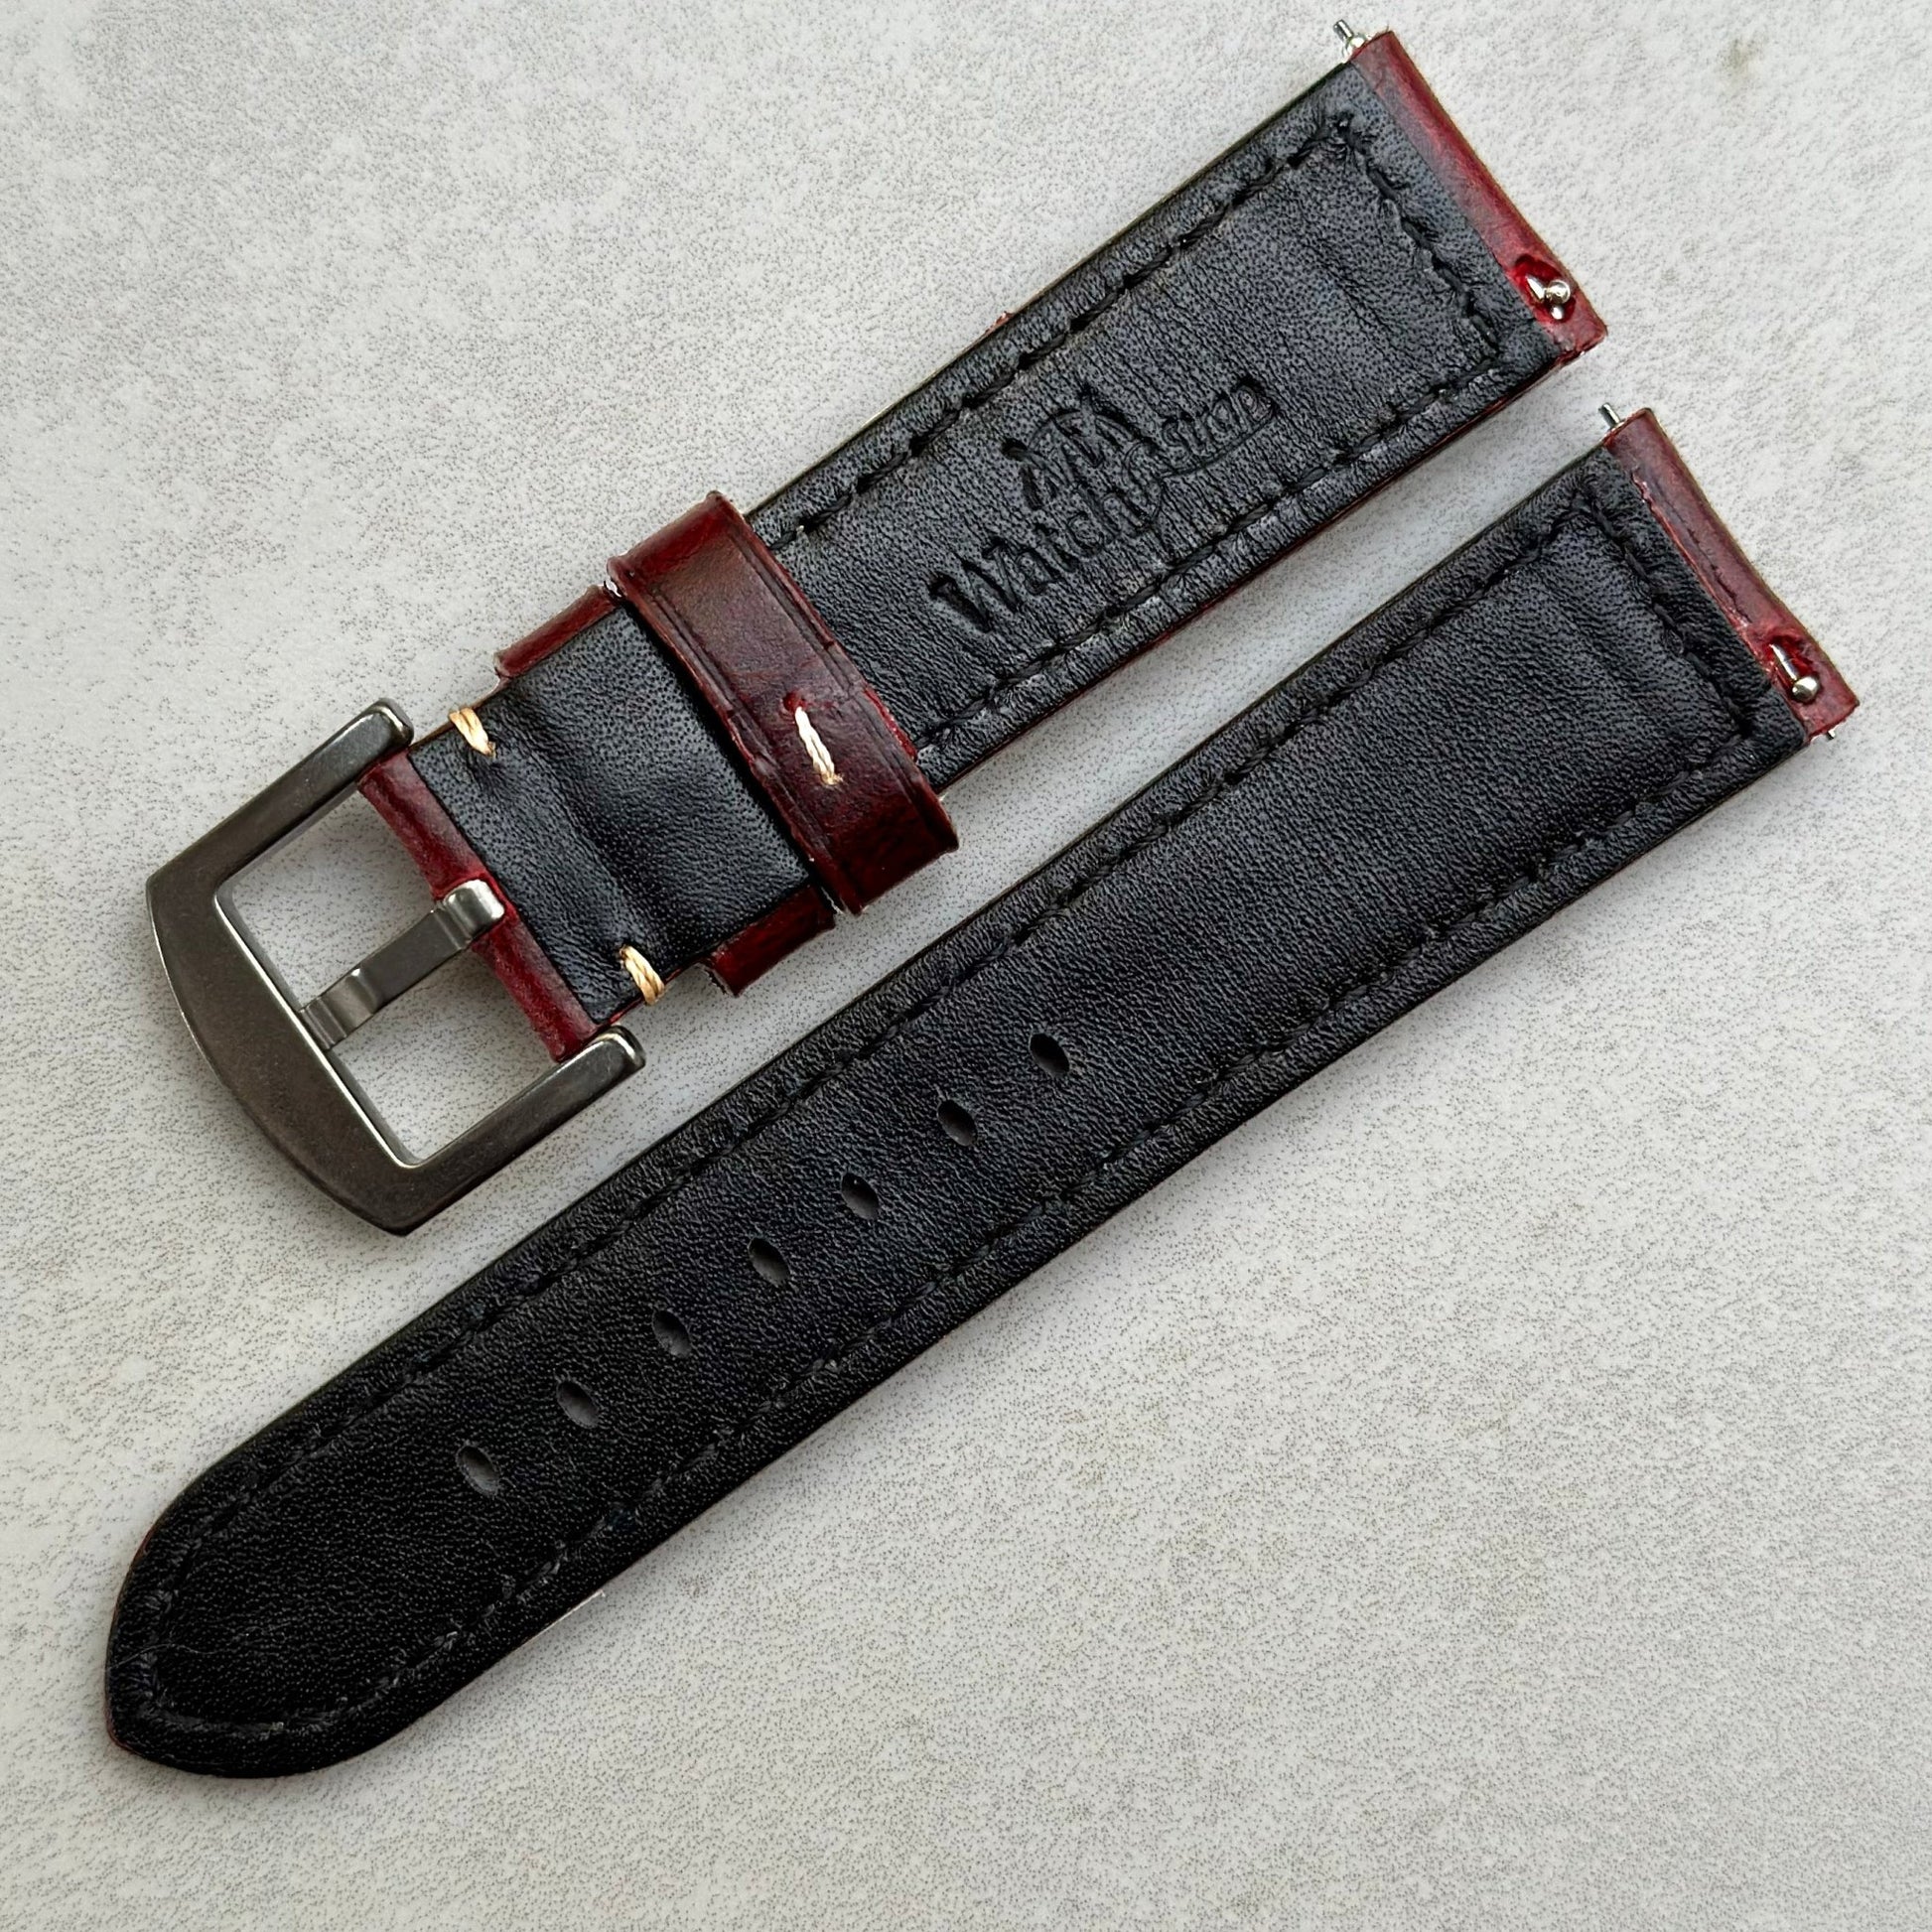 Berlin burgundy full grain leather watch strap. Watch And Strap logo. Quick release pins.